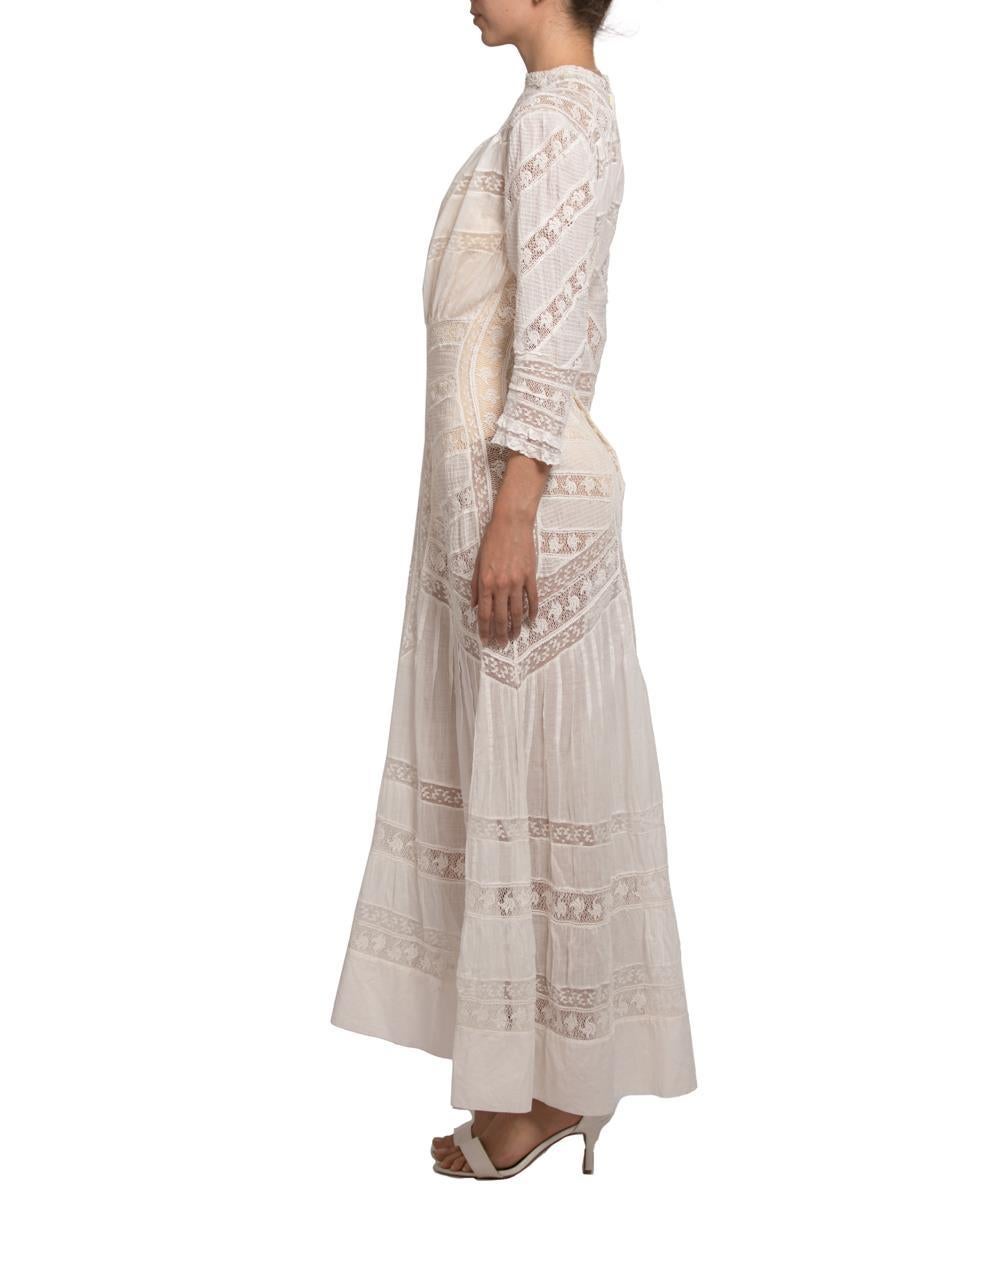 Victorian Cream Organic Cotton Lace Tea Dress With Sleeves In Excellent Condition For Sale In New York, NY